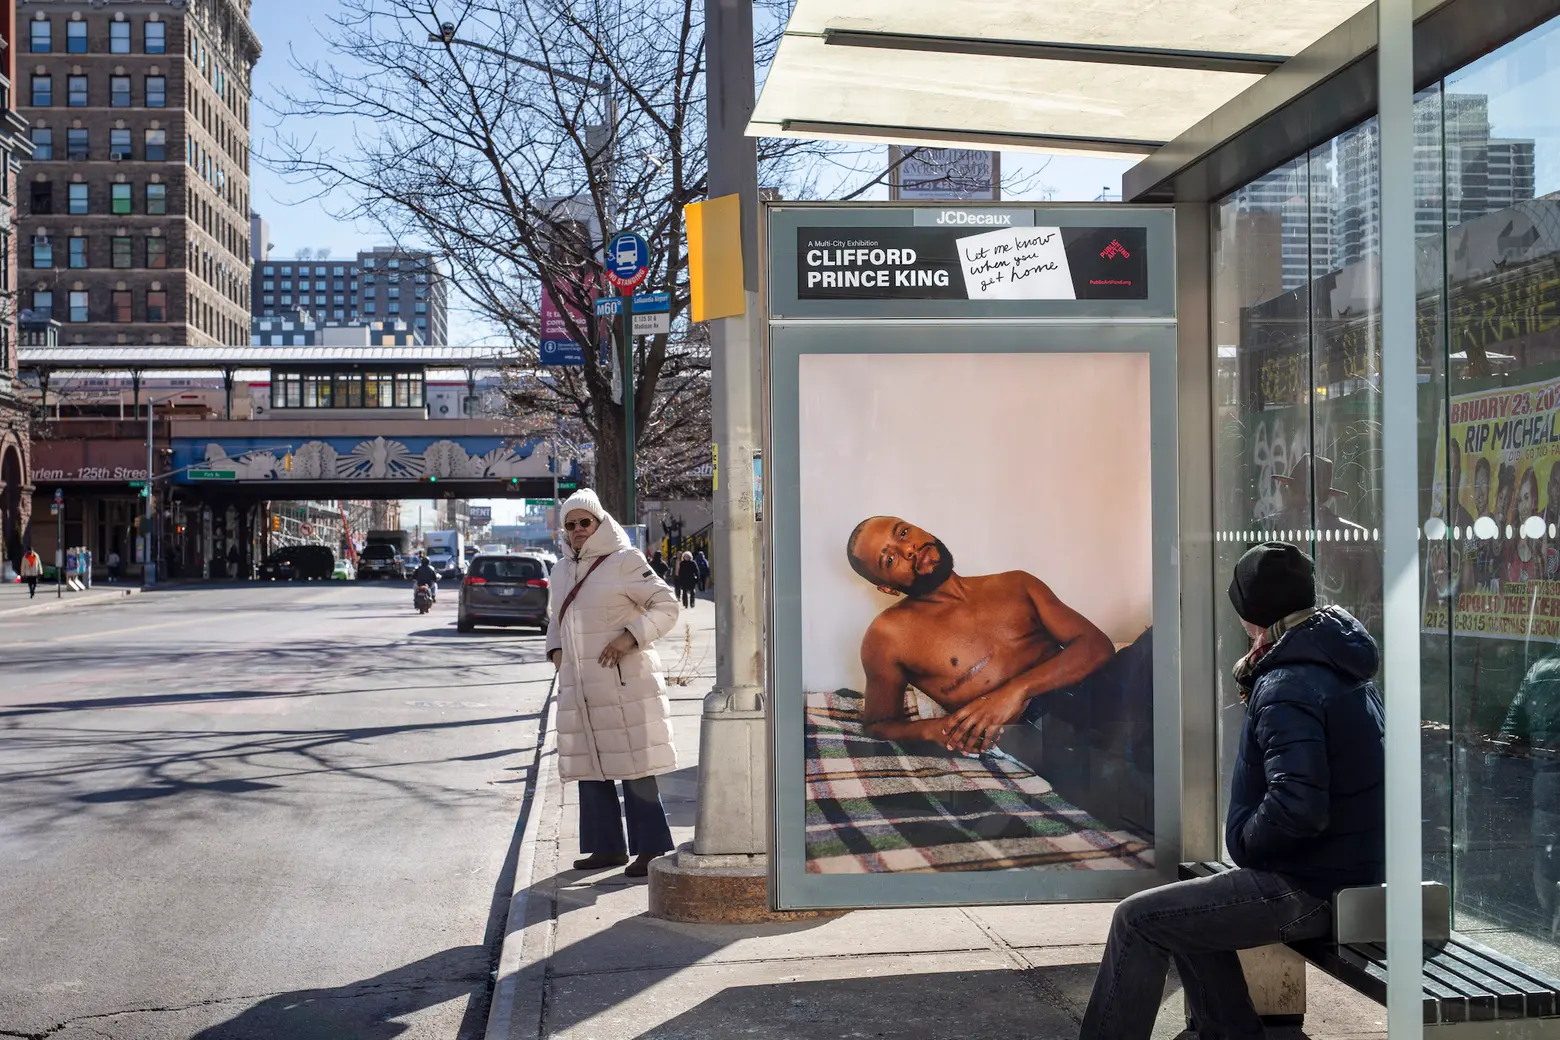 Tender photographs capturing queer Black experience on view at NYC bus stops